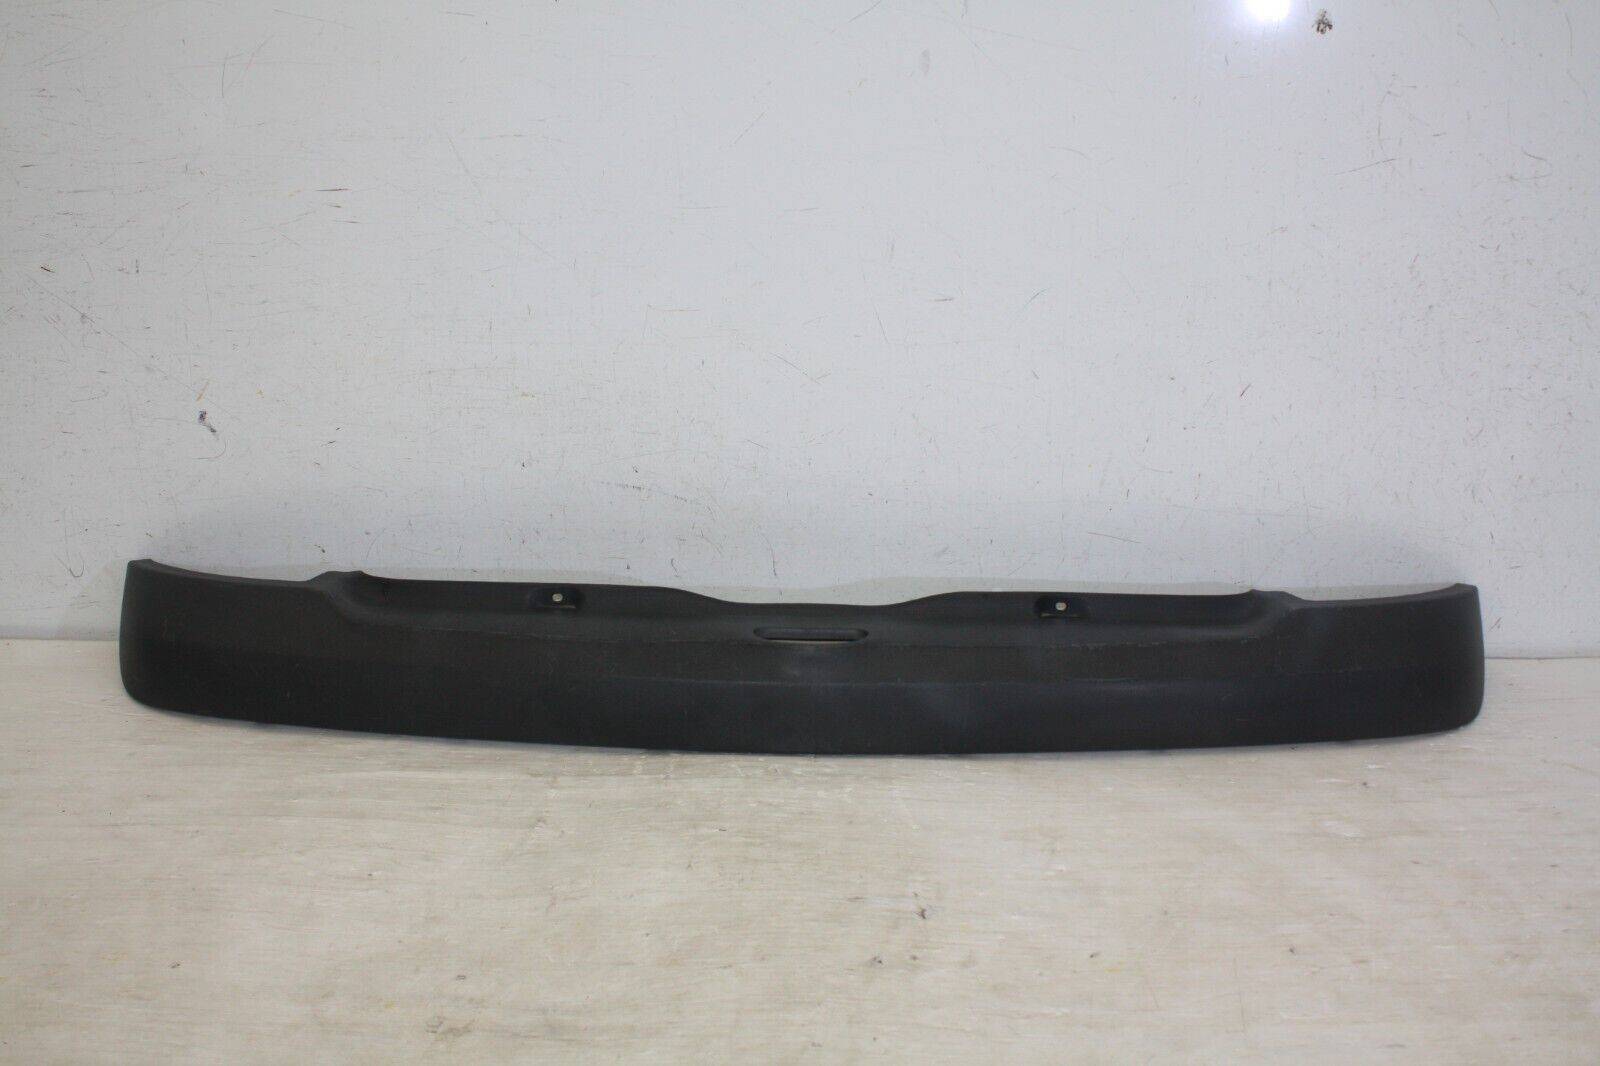 Renault-Clio-Rear-Bumper-Upper-Section-2001-TO-2005-8200083217-Genuine-176093485781